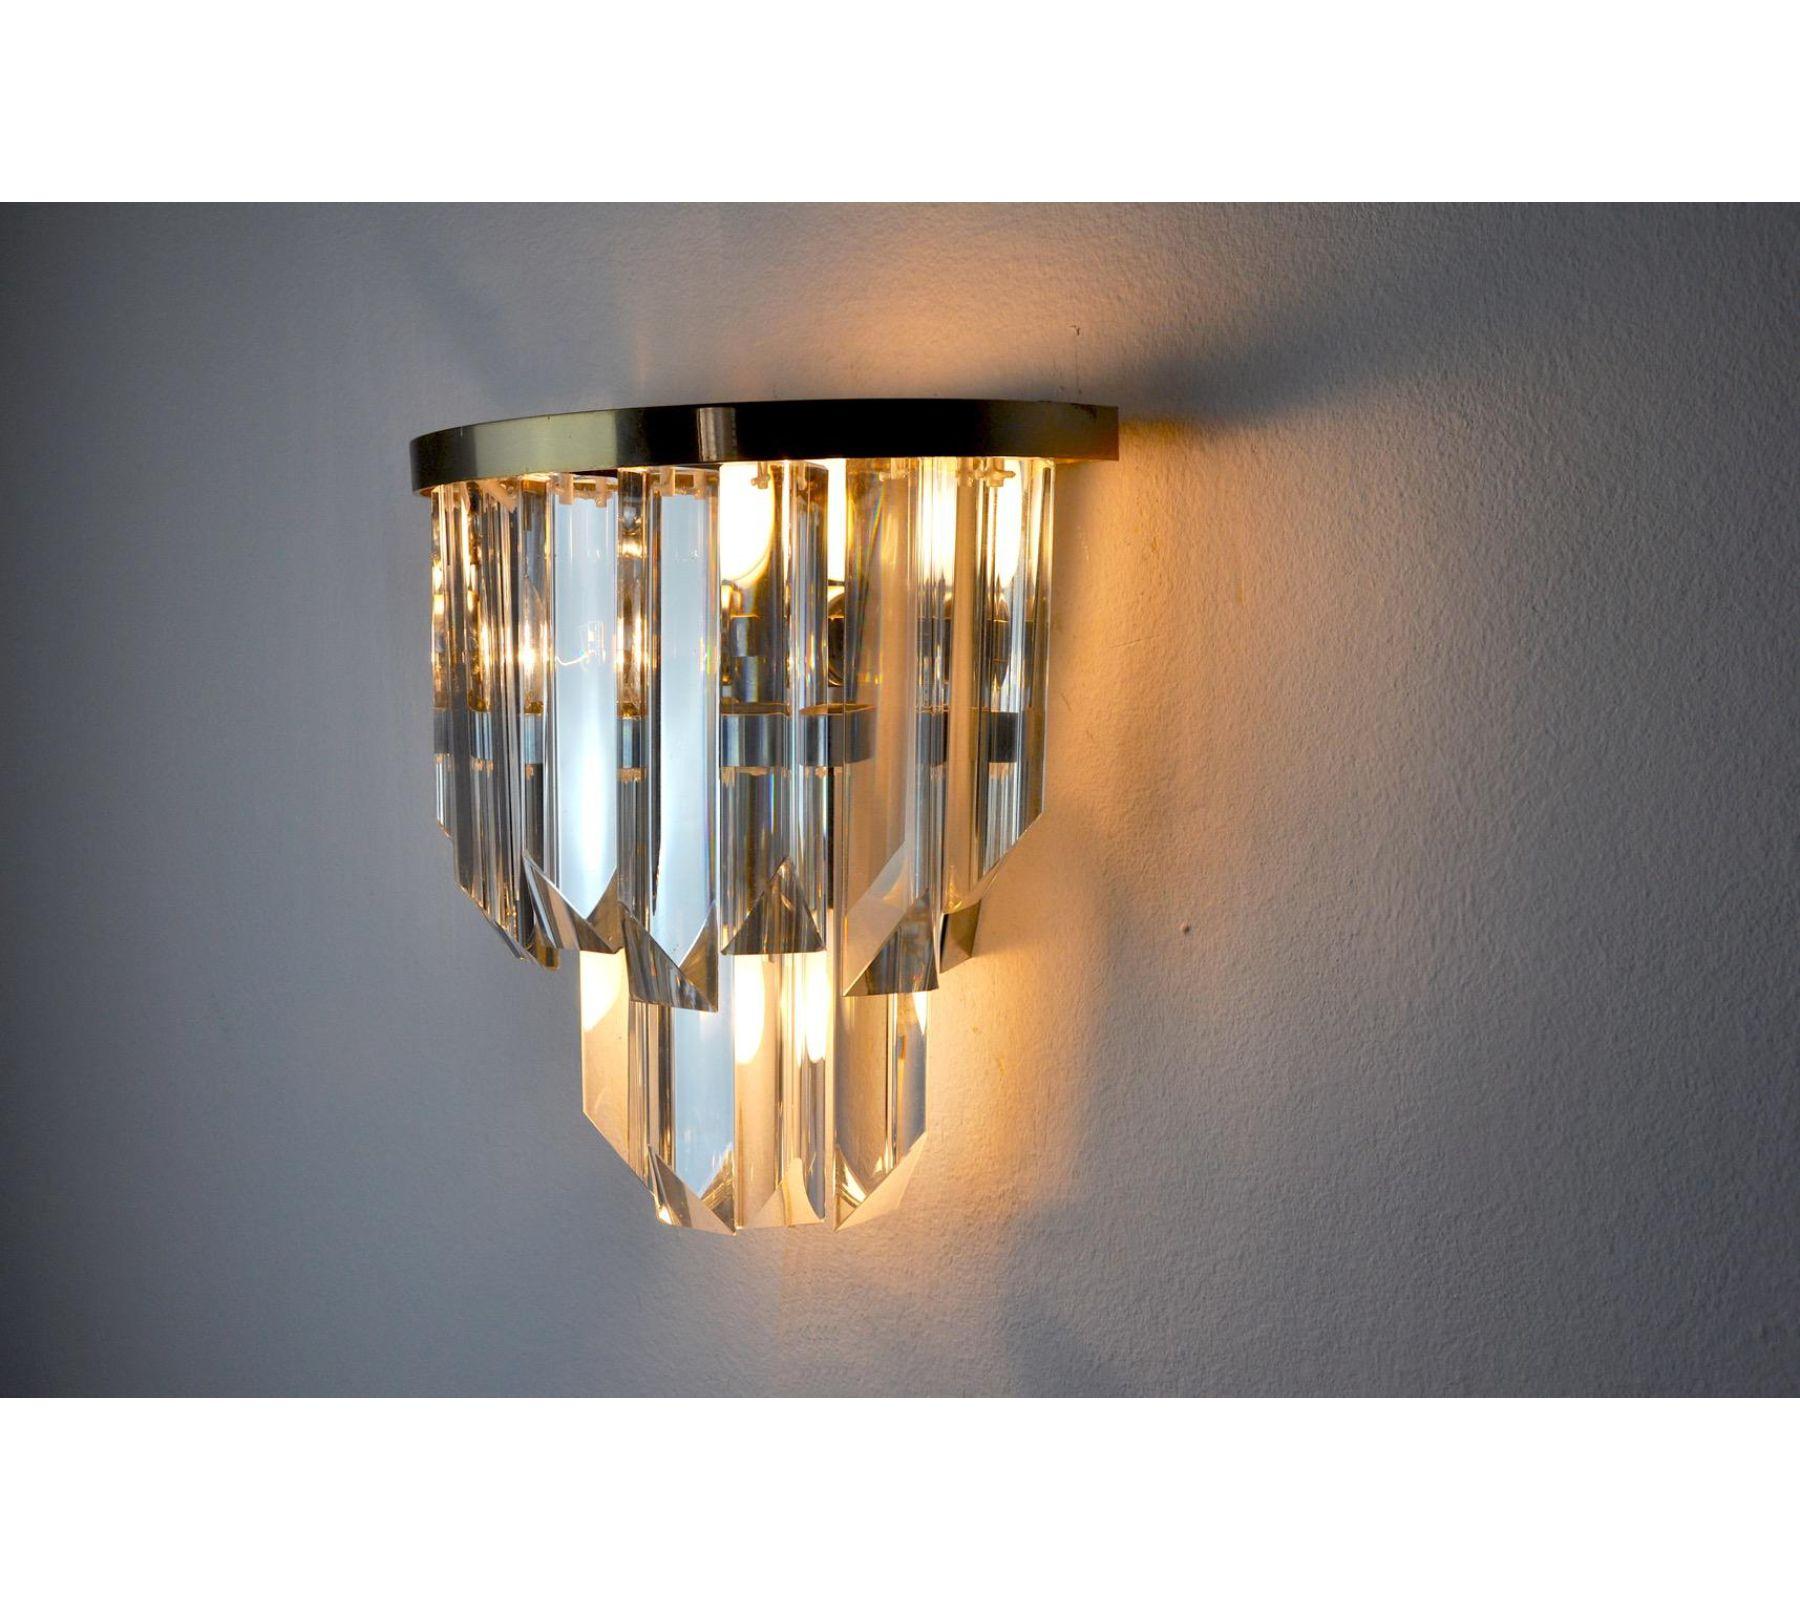 Very beautiful Venini wall lamp dating from the 70s. Cut glass and silver metal structure. Unique object that will illuminate and bring a real design touch to your interior. Electricity verified, mark of time relative to the age of the object. Easy